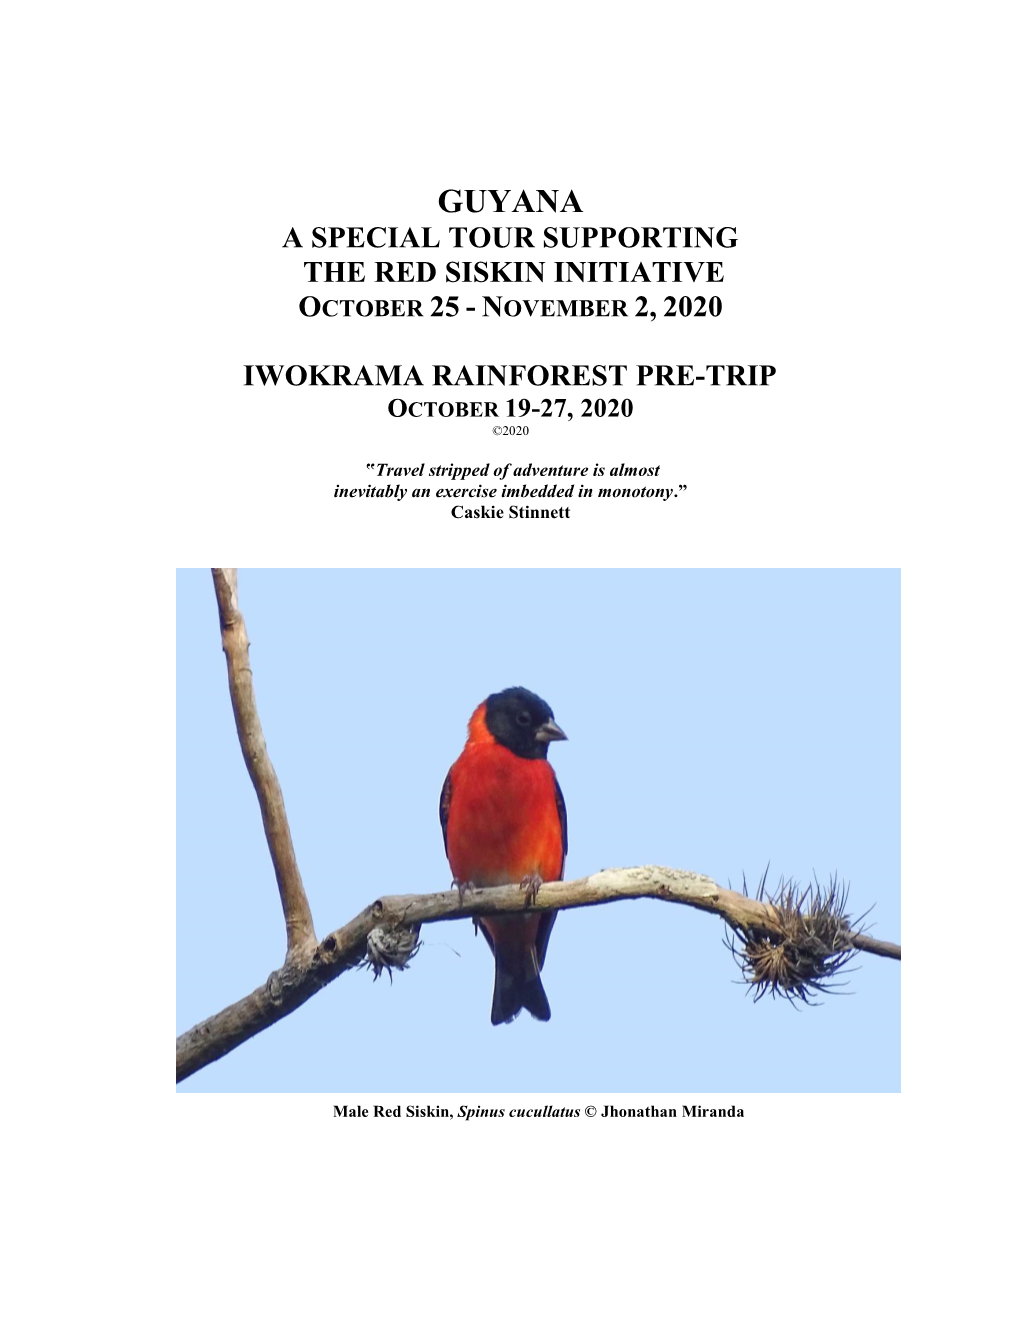 Guyana a Special Tour Supporting the Red Siskin Initiative October 25 - November 2, 2020